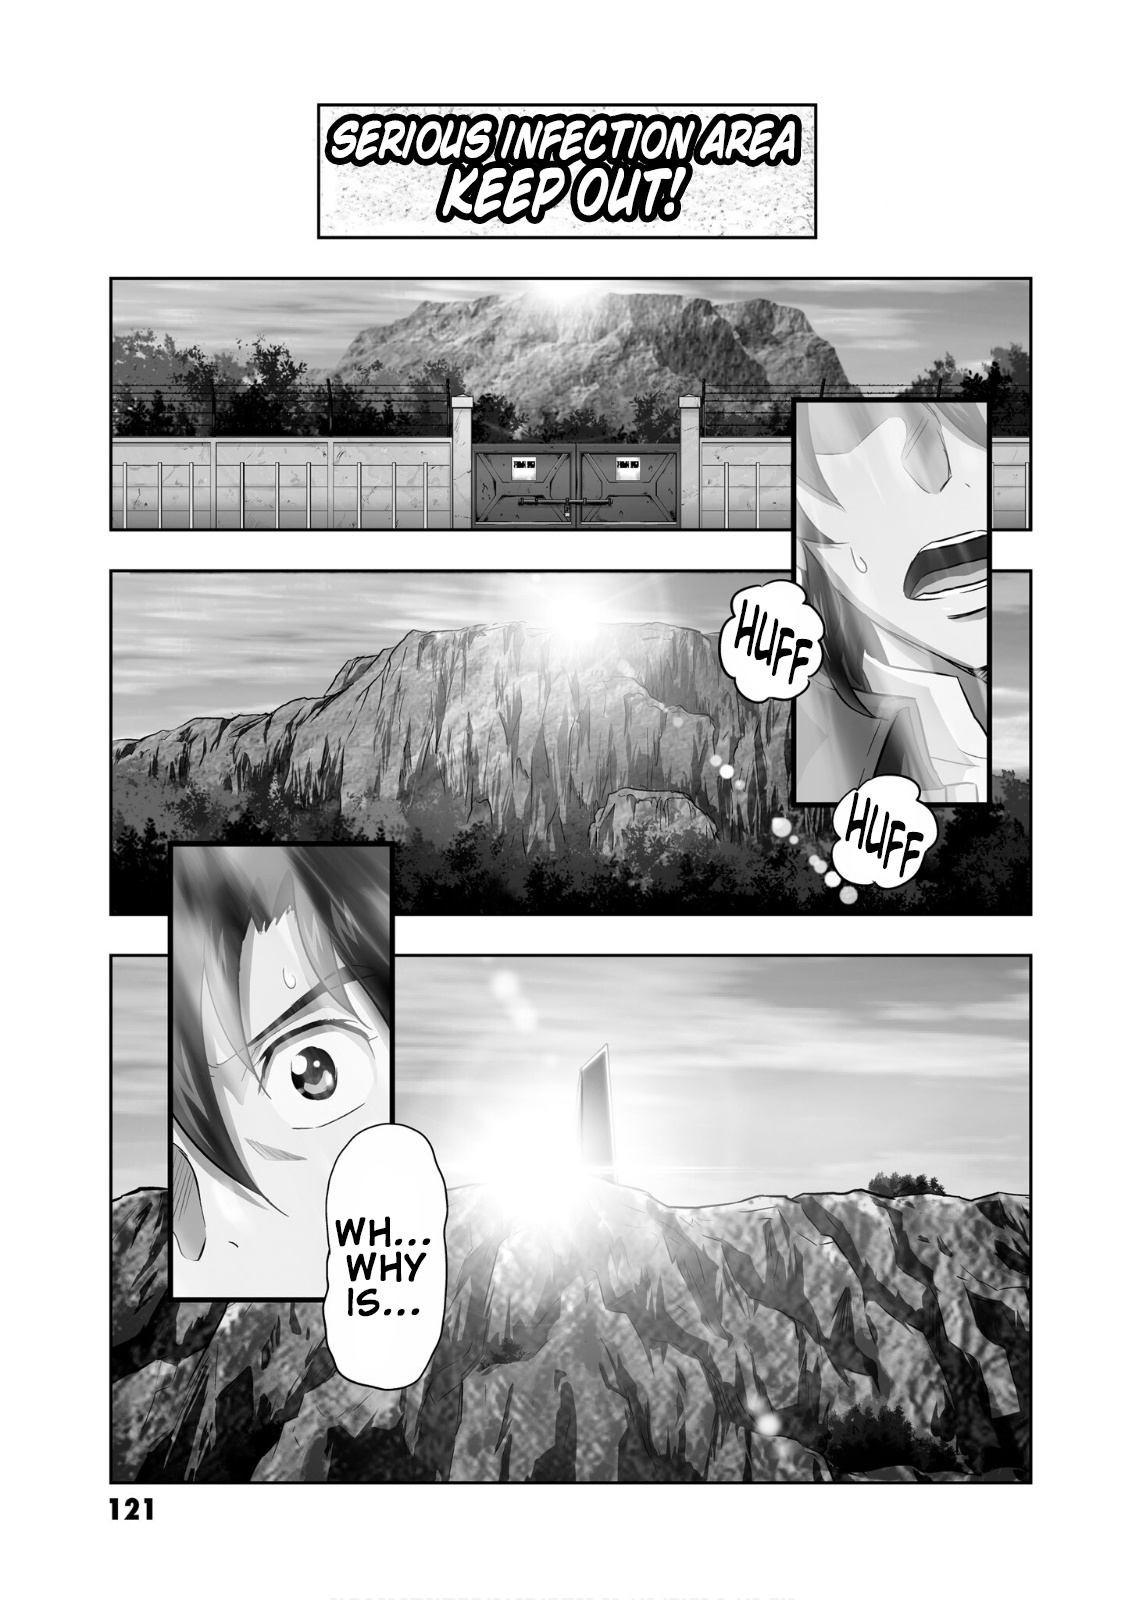 After War Gundam X Re:master Edition Vol.3 Chapter 10.5: Next Prologue - As Long As I'm With You - Picture 2